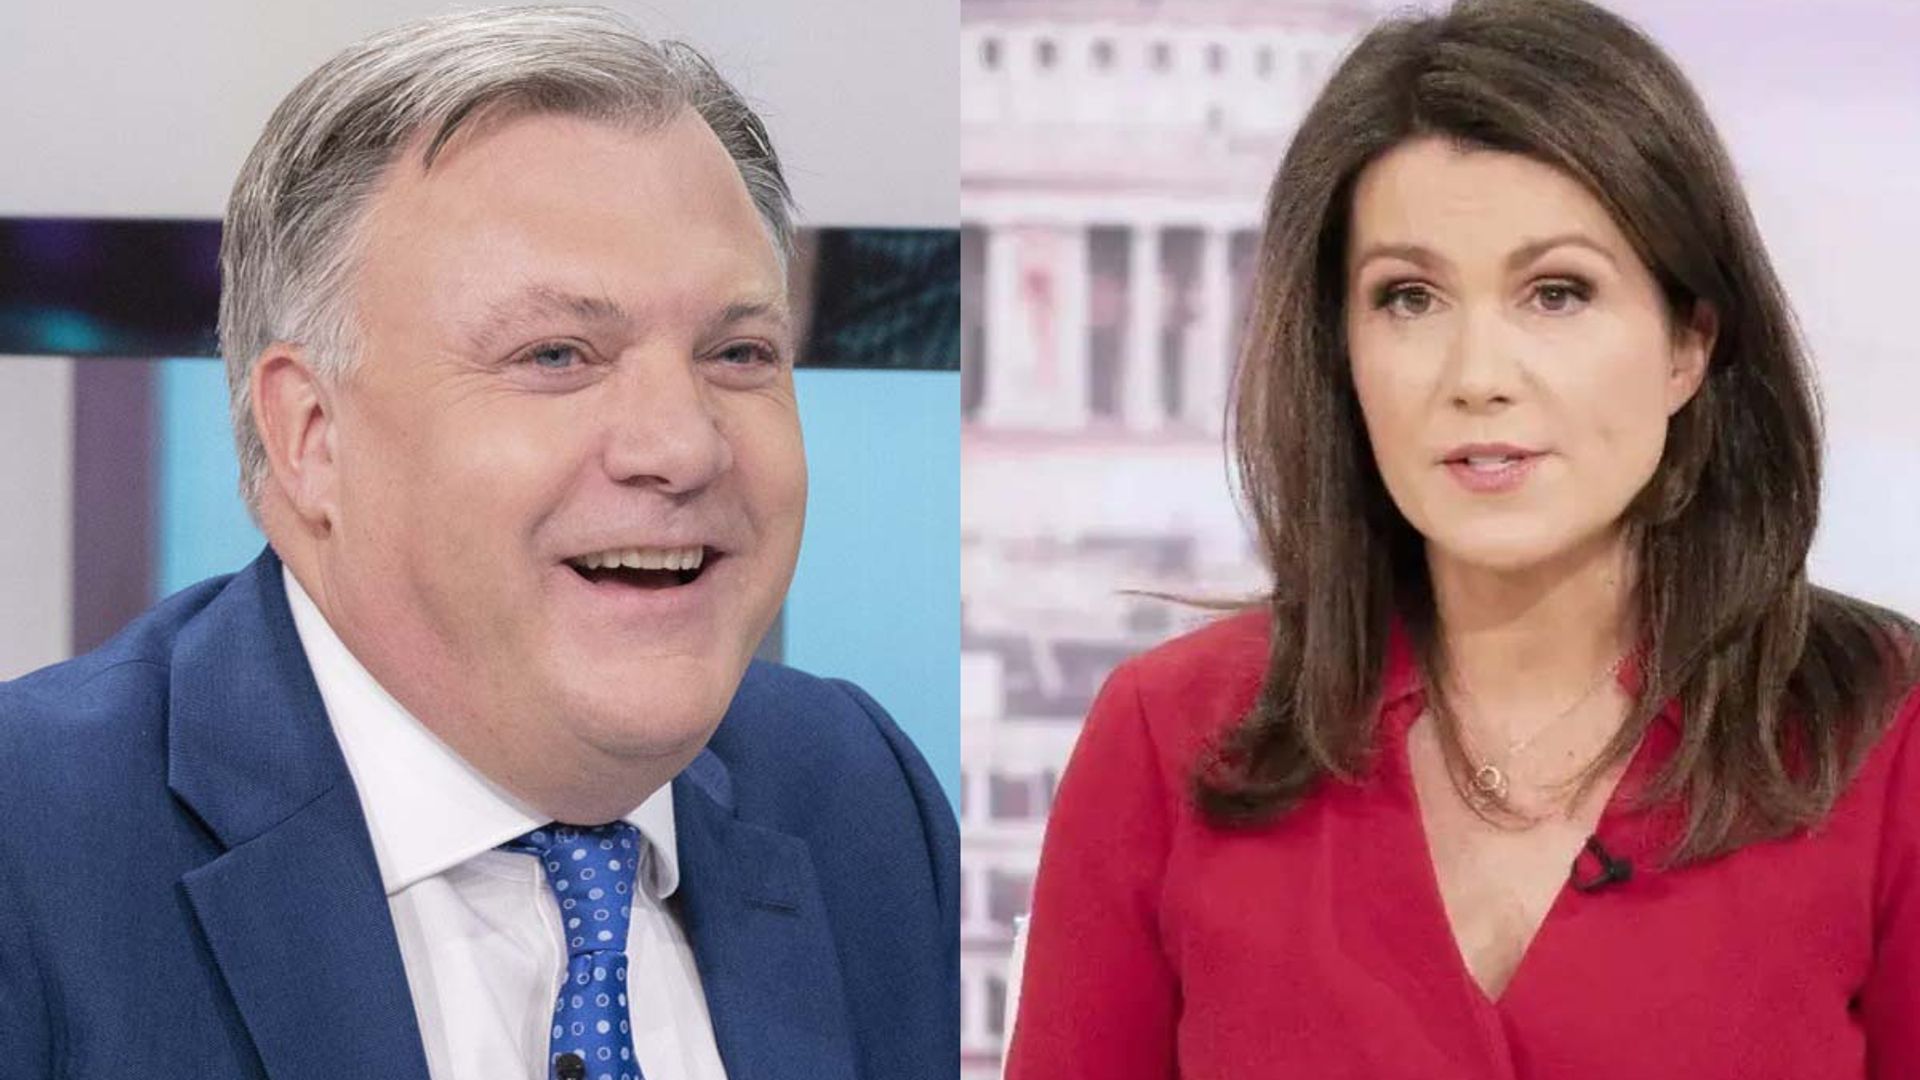 GMB viewers left 'cringing' as Ed Balls 'puts moves' on Susanna Reid